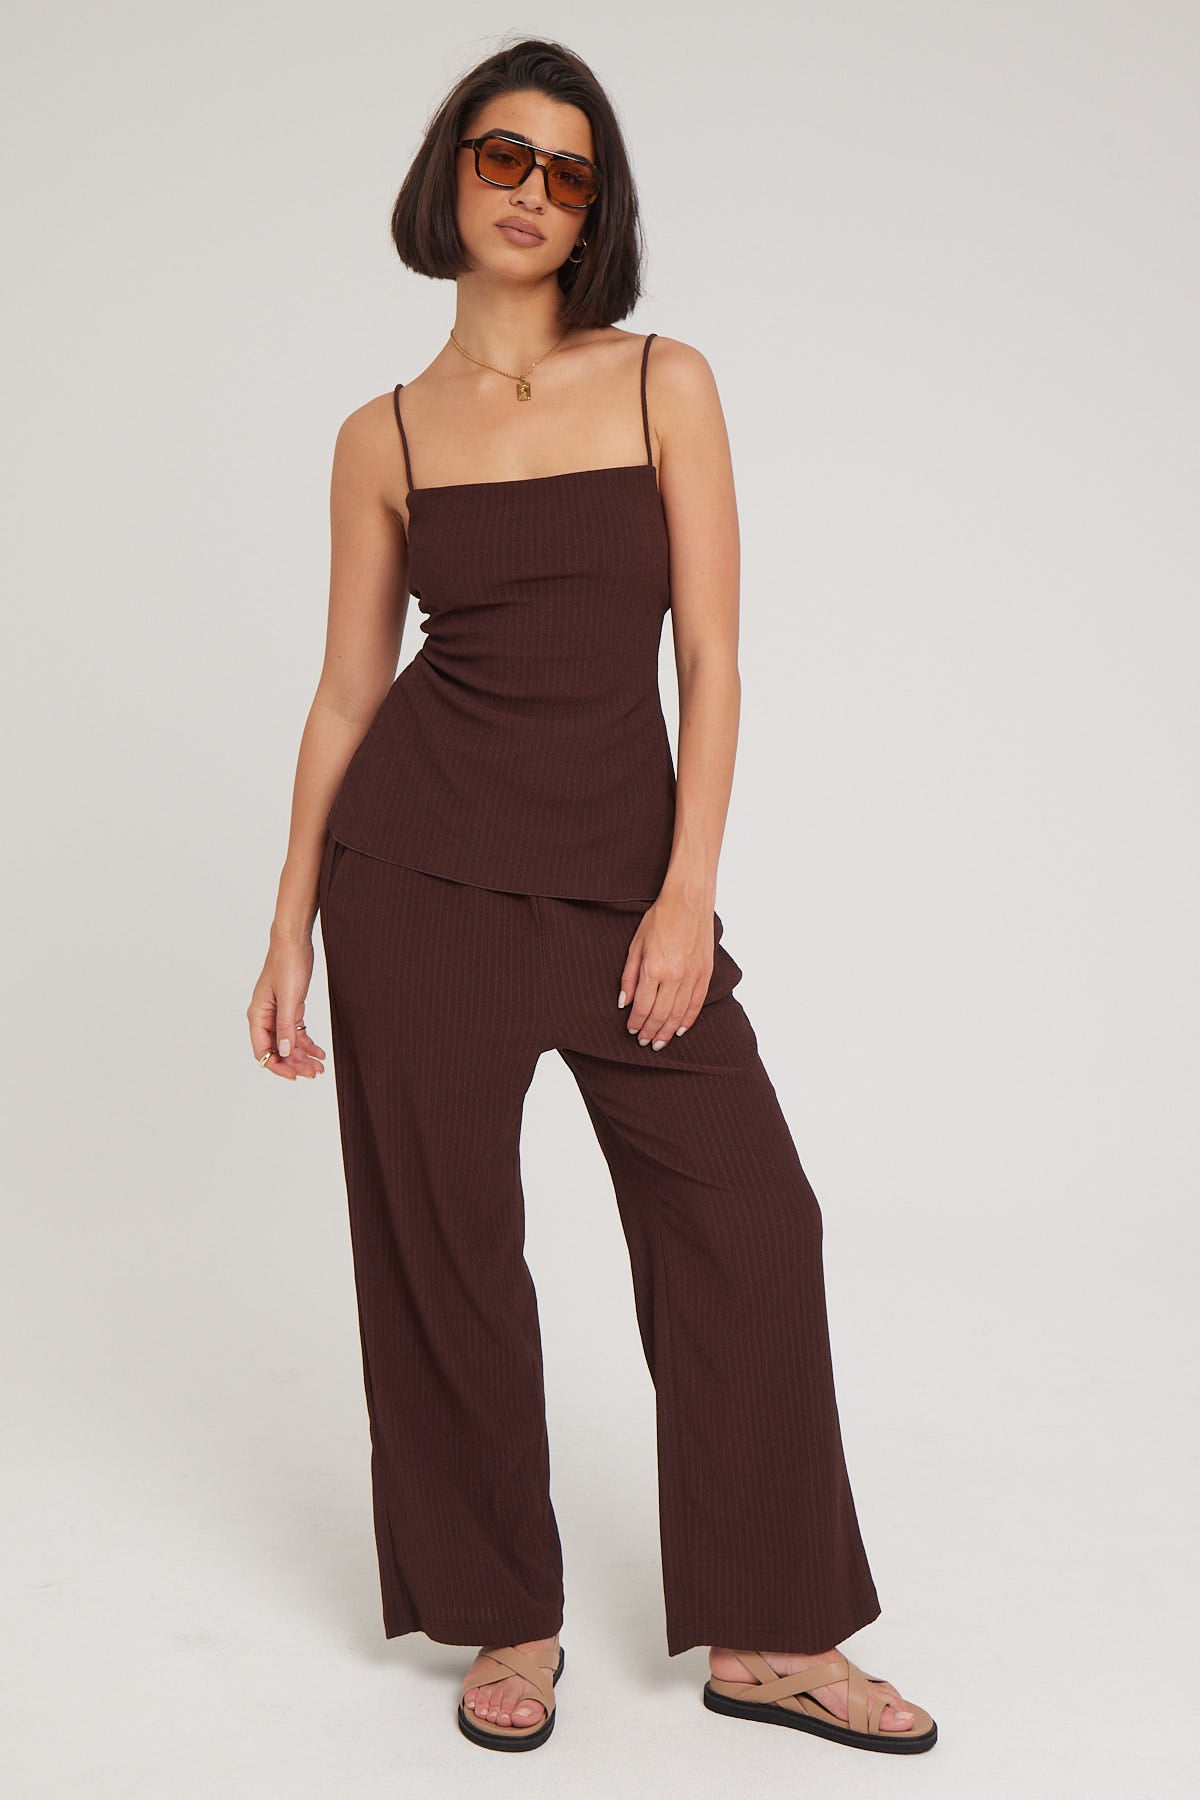 Perfect Stranger Chateau Textured Pant Brown